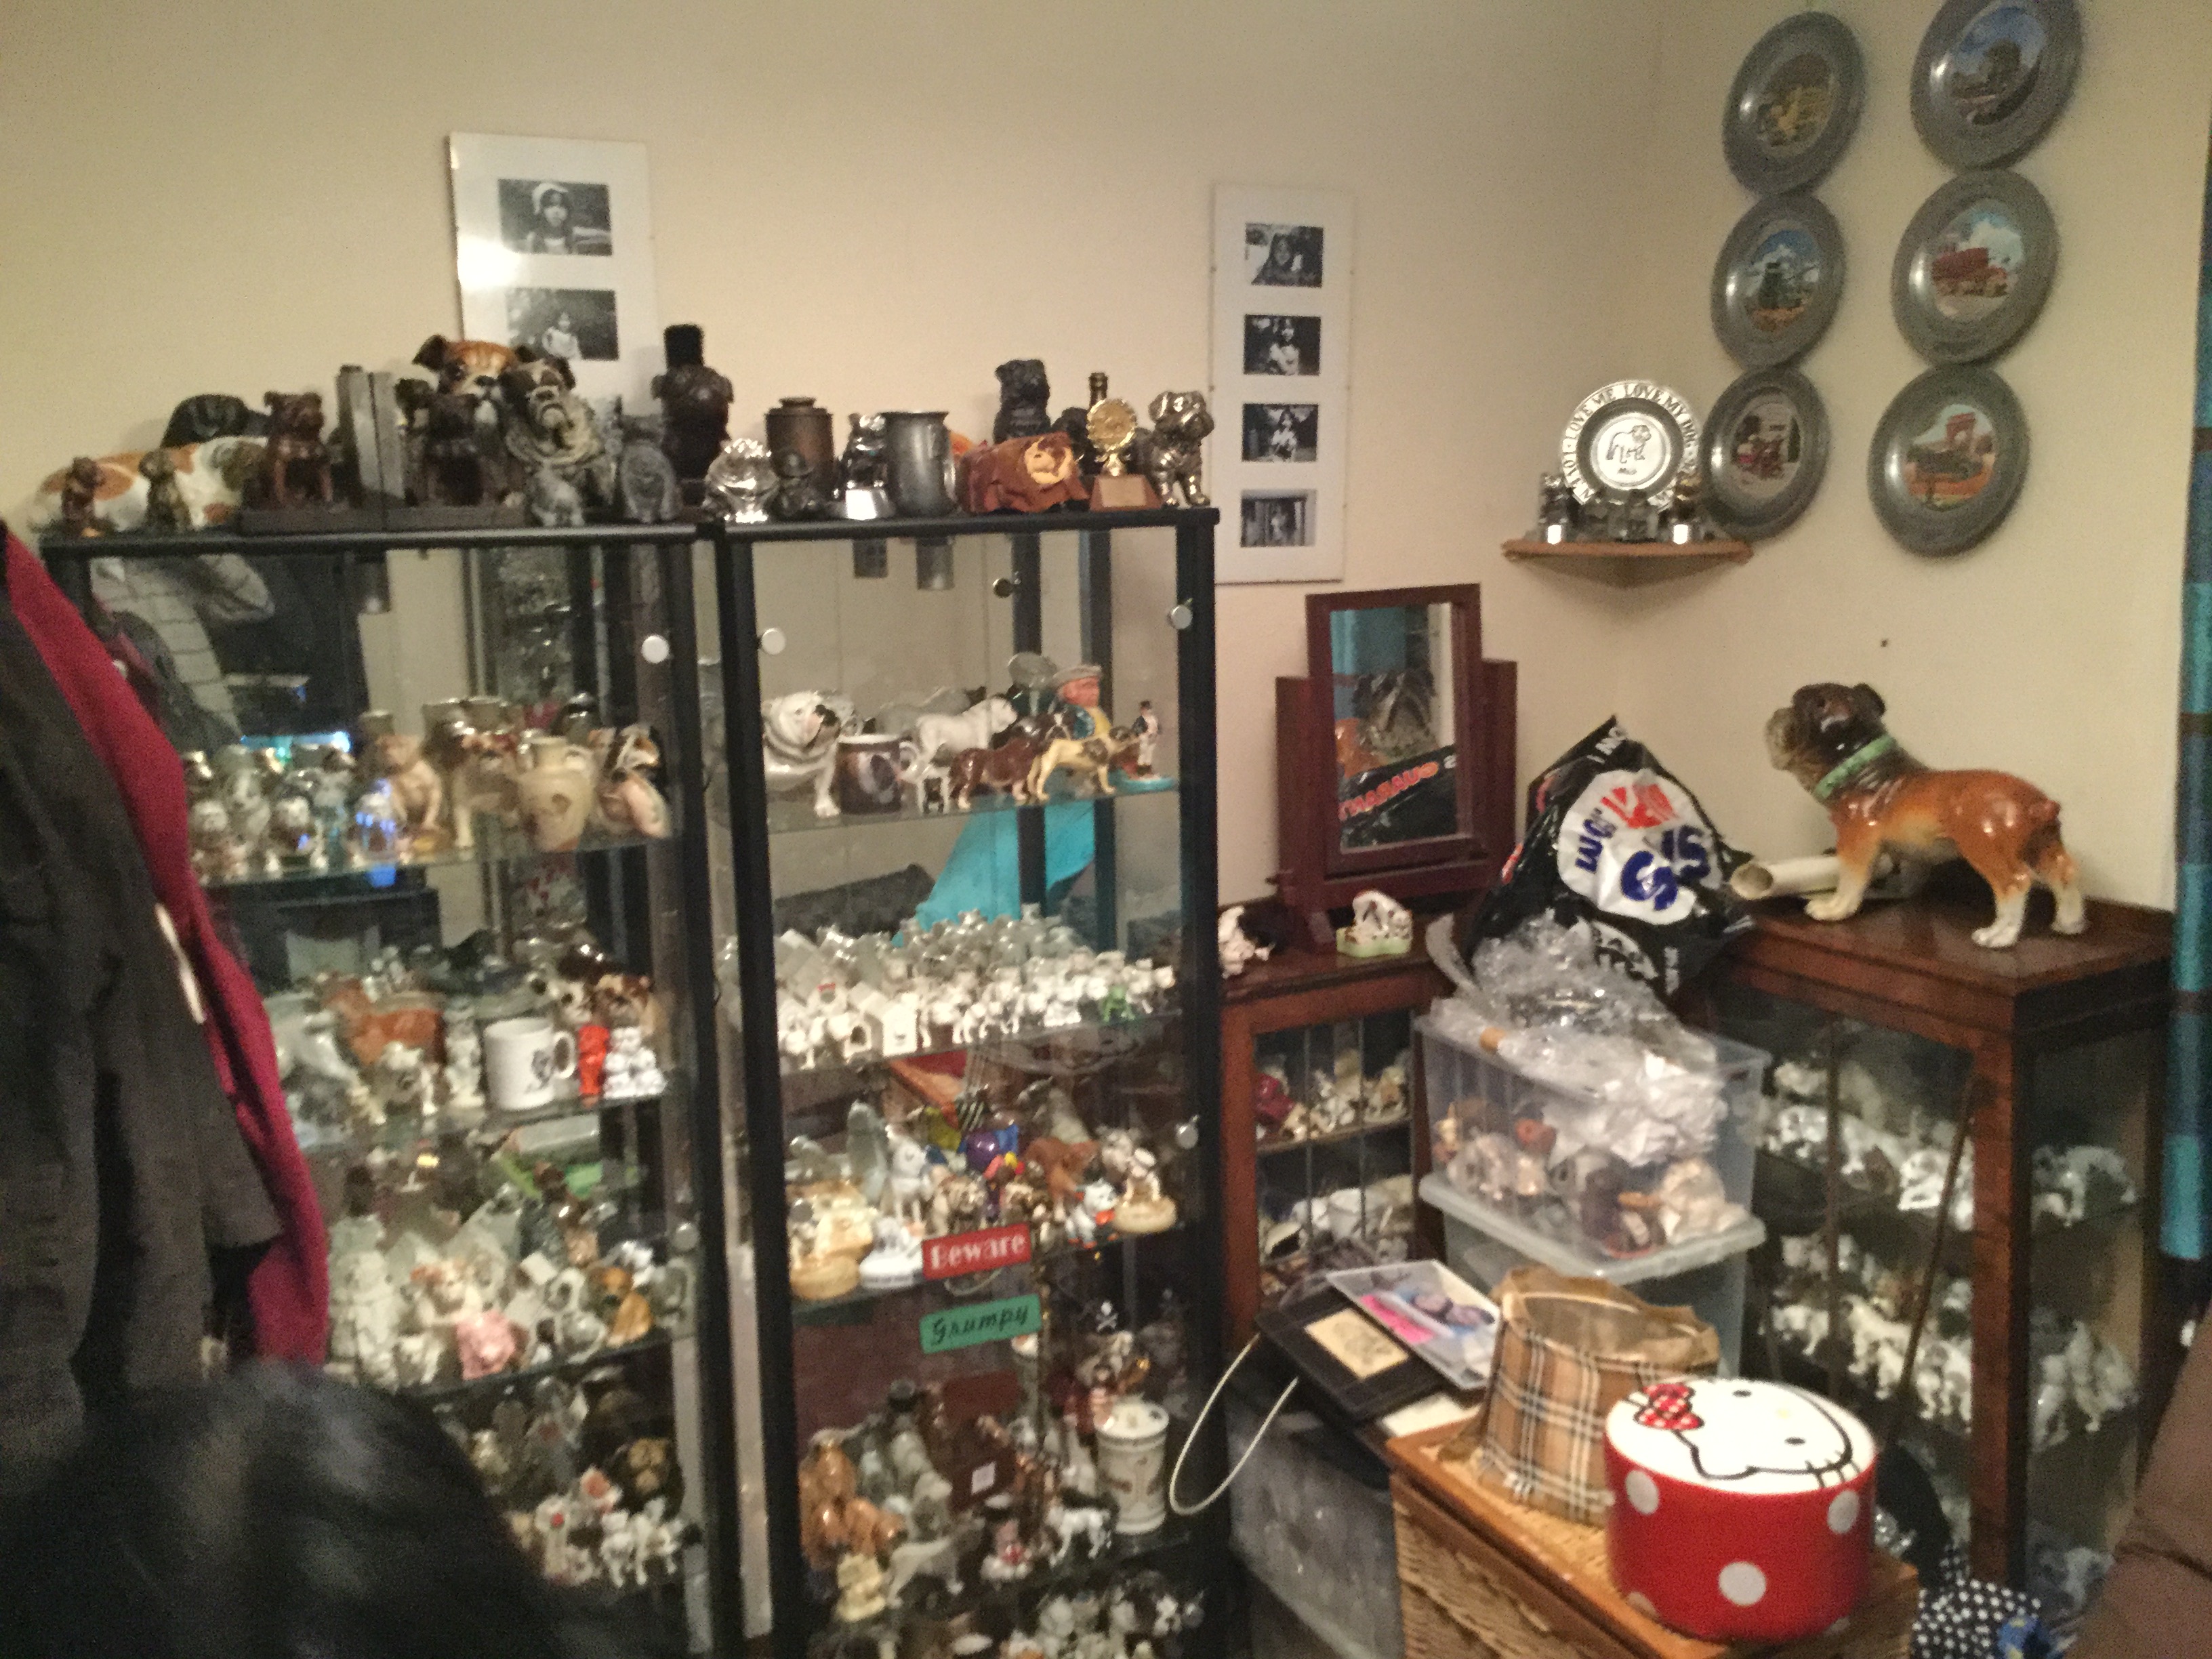 Moving collection Displays